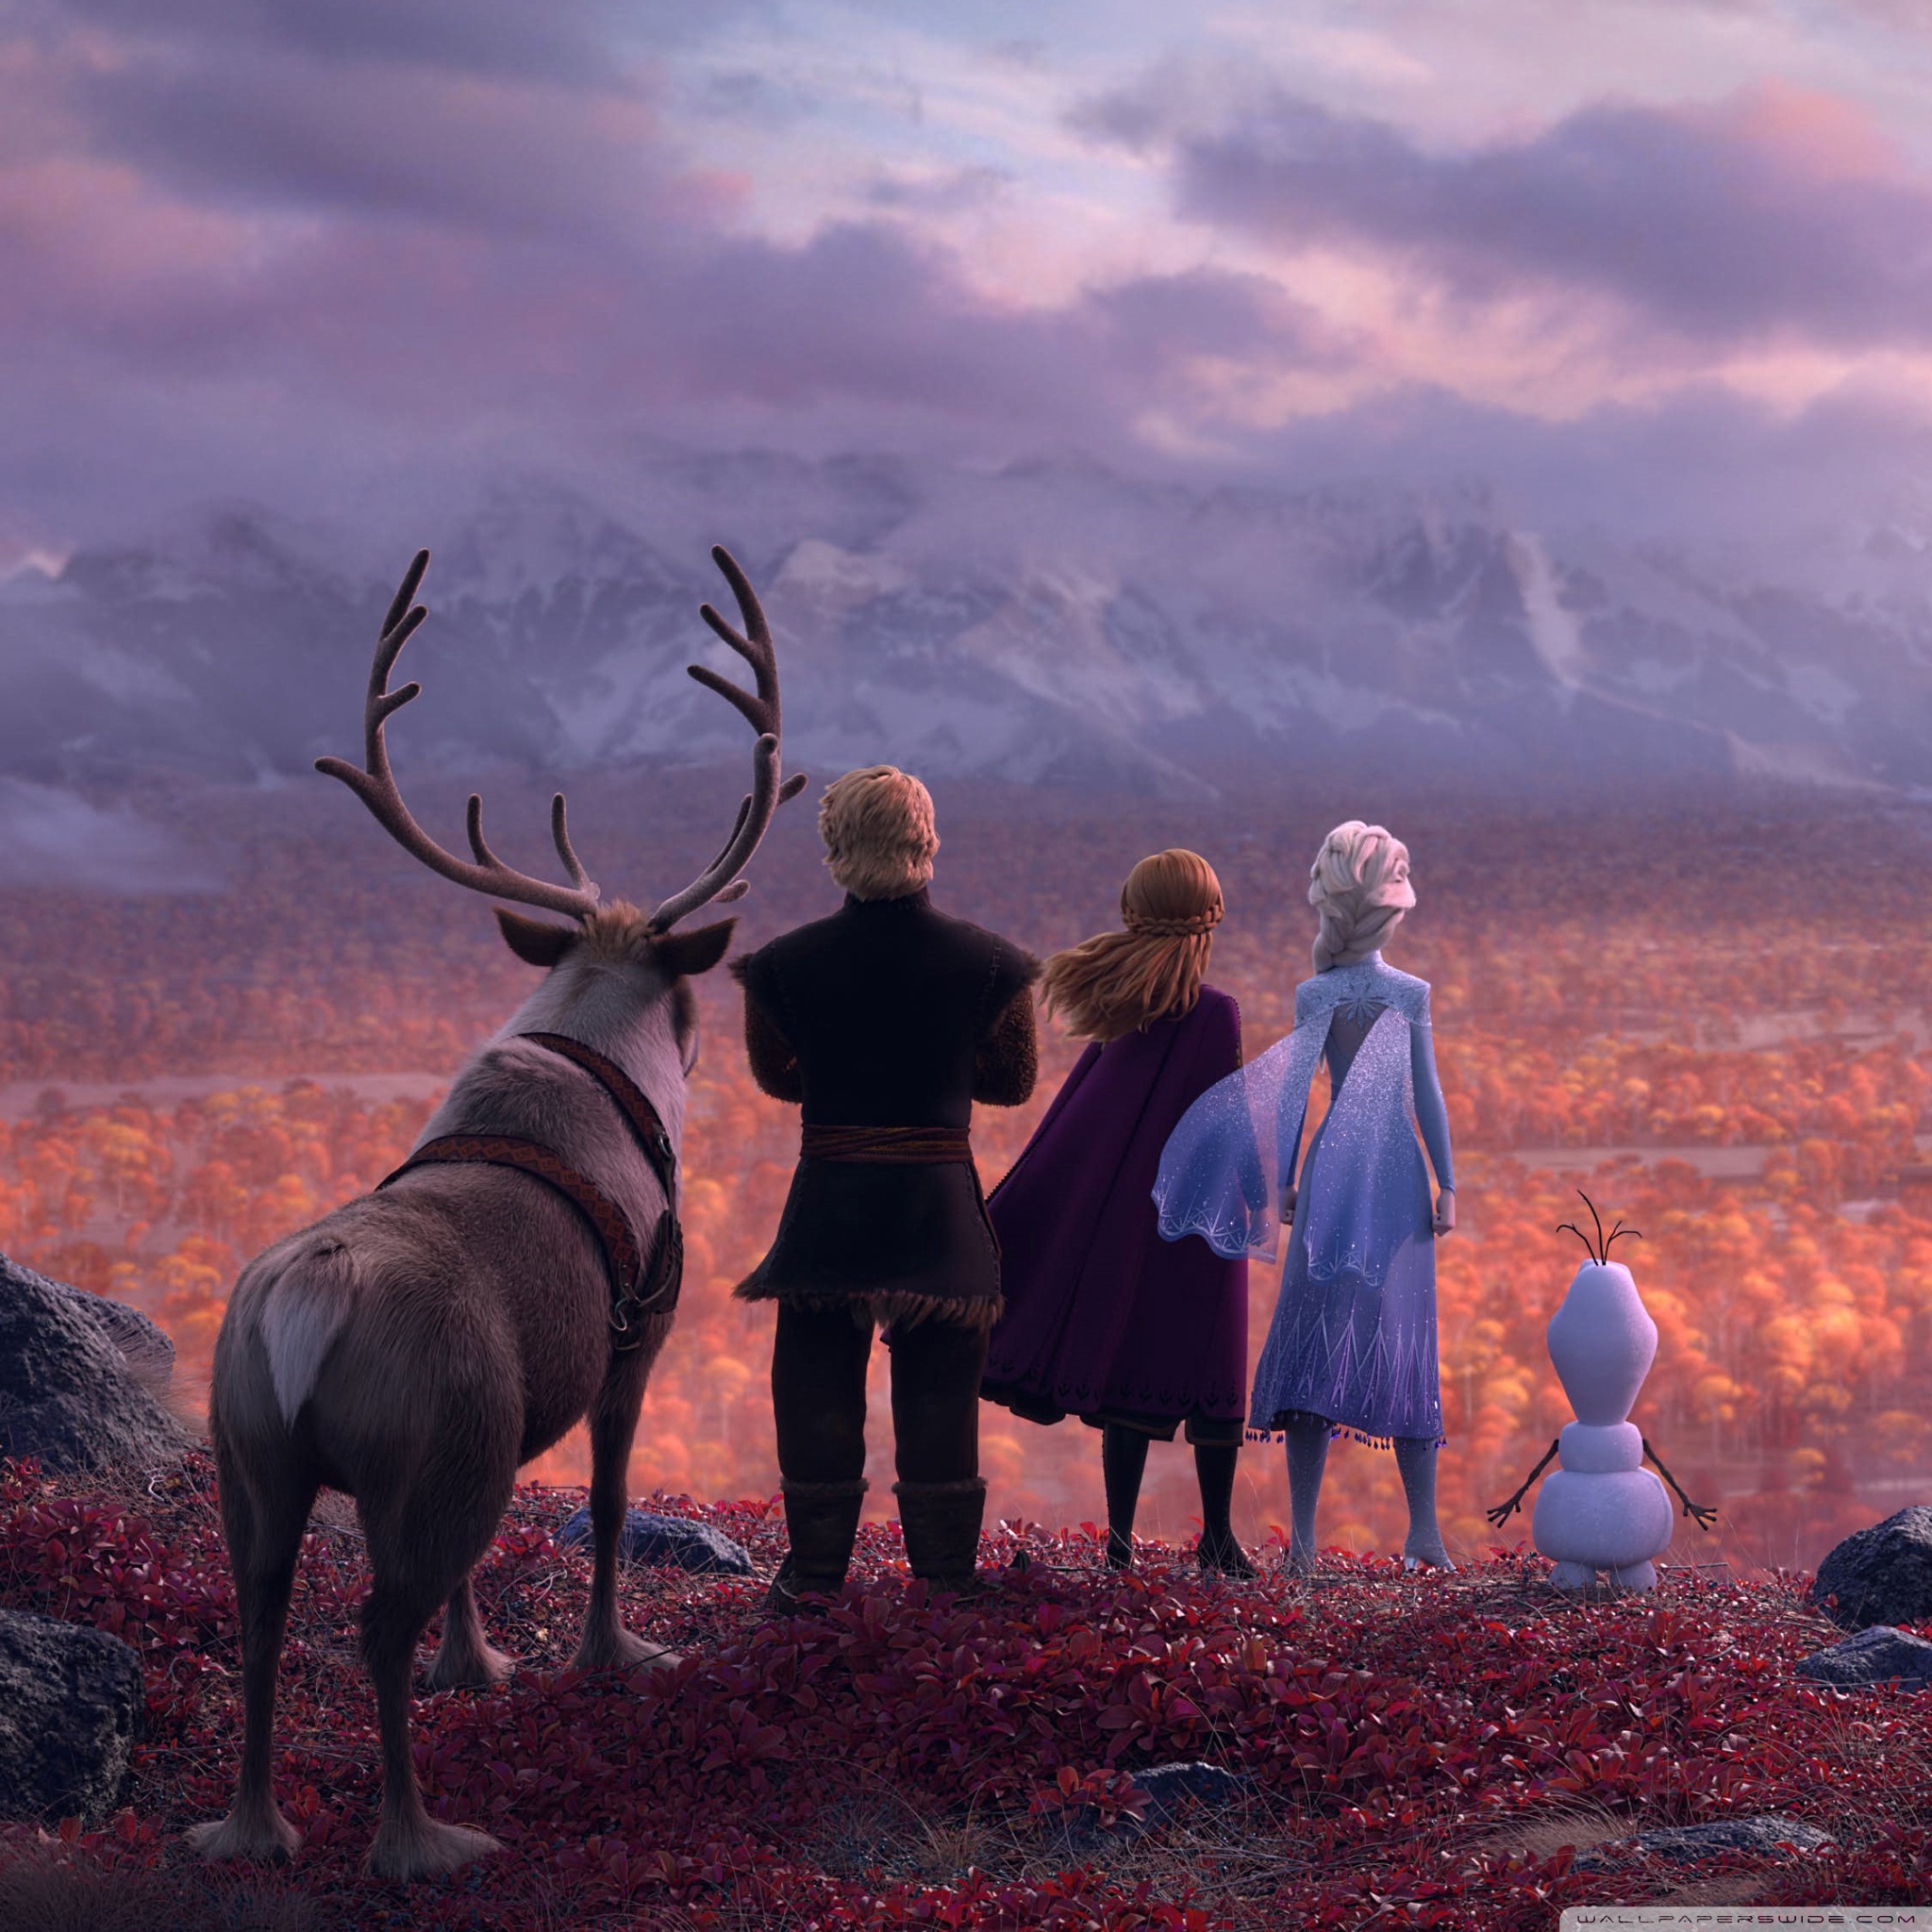 Frozen 2 Poster 2019 Image Wallpapers